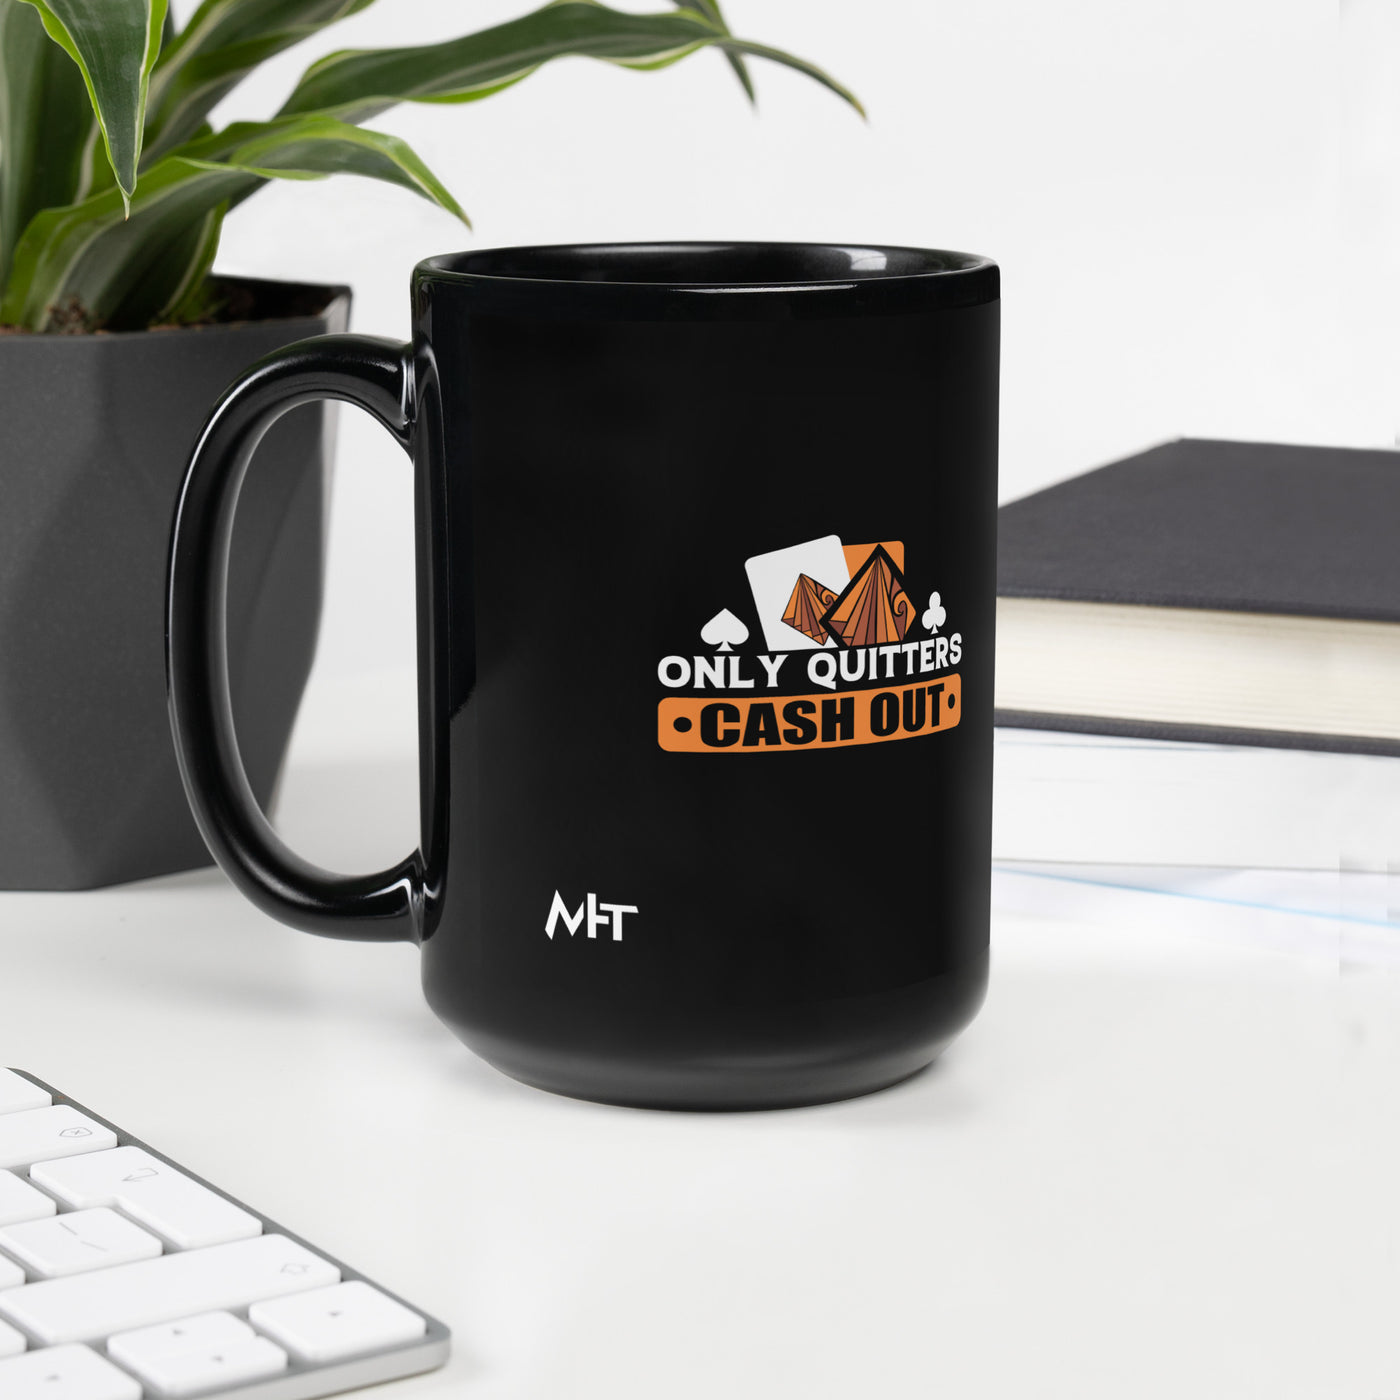 Only Quitters Cash Out - Black Glossy Mug